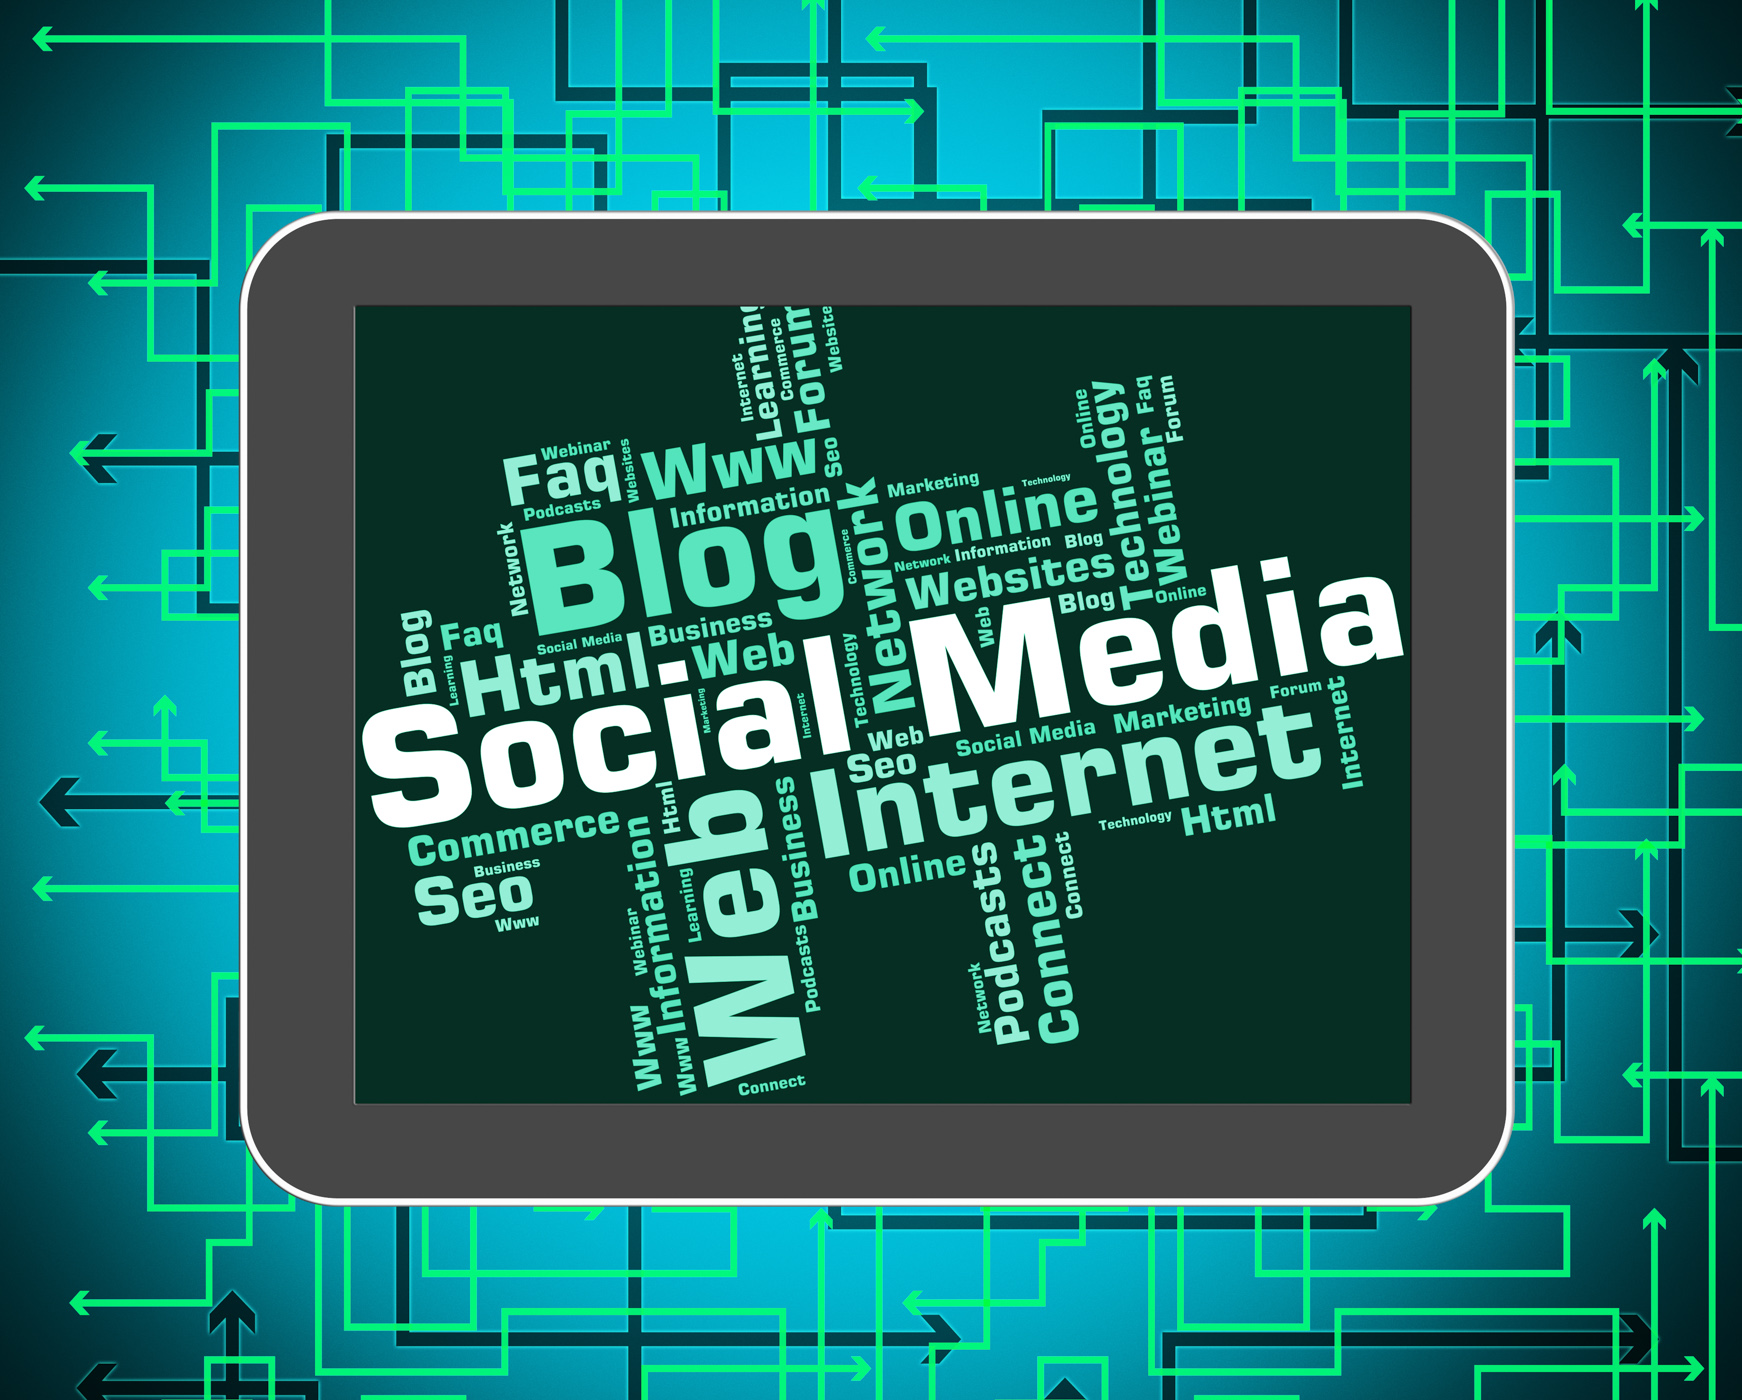 Social media represents news feed and blogs photo